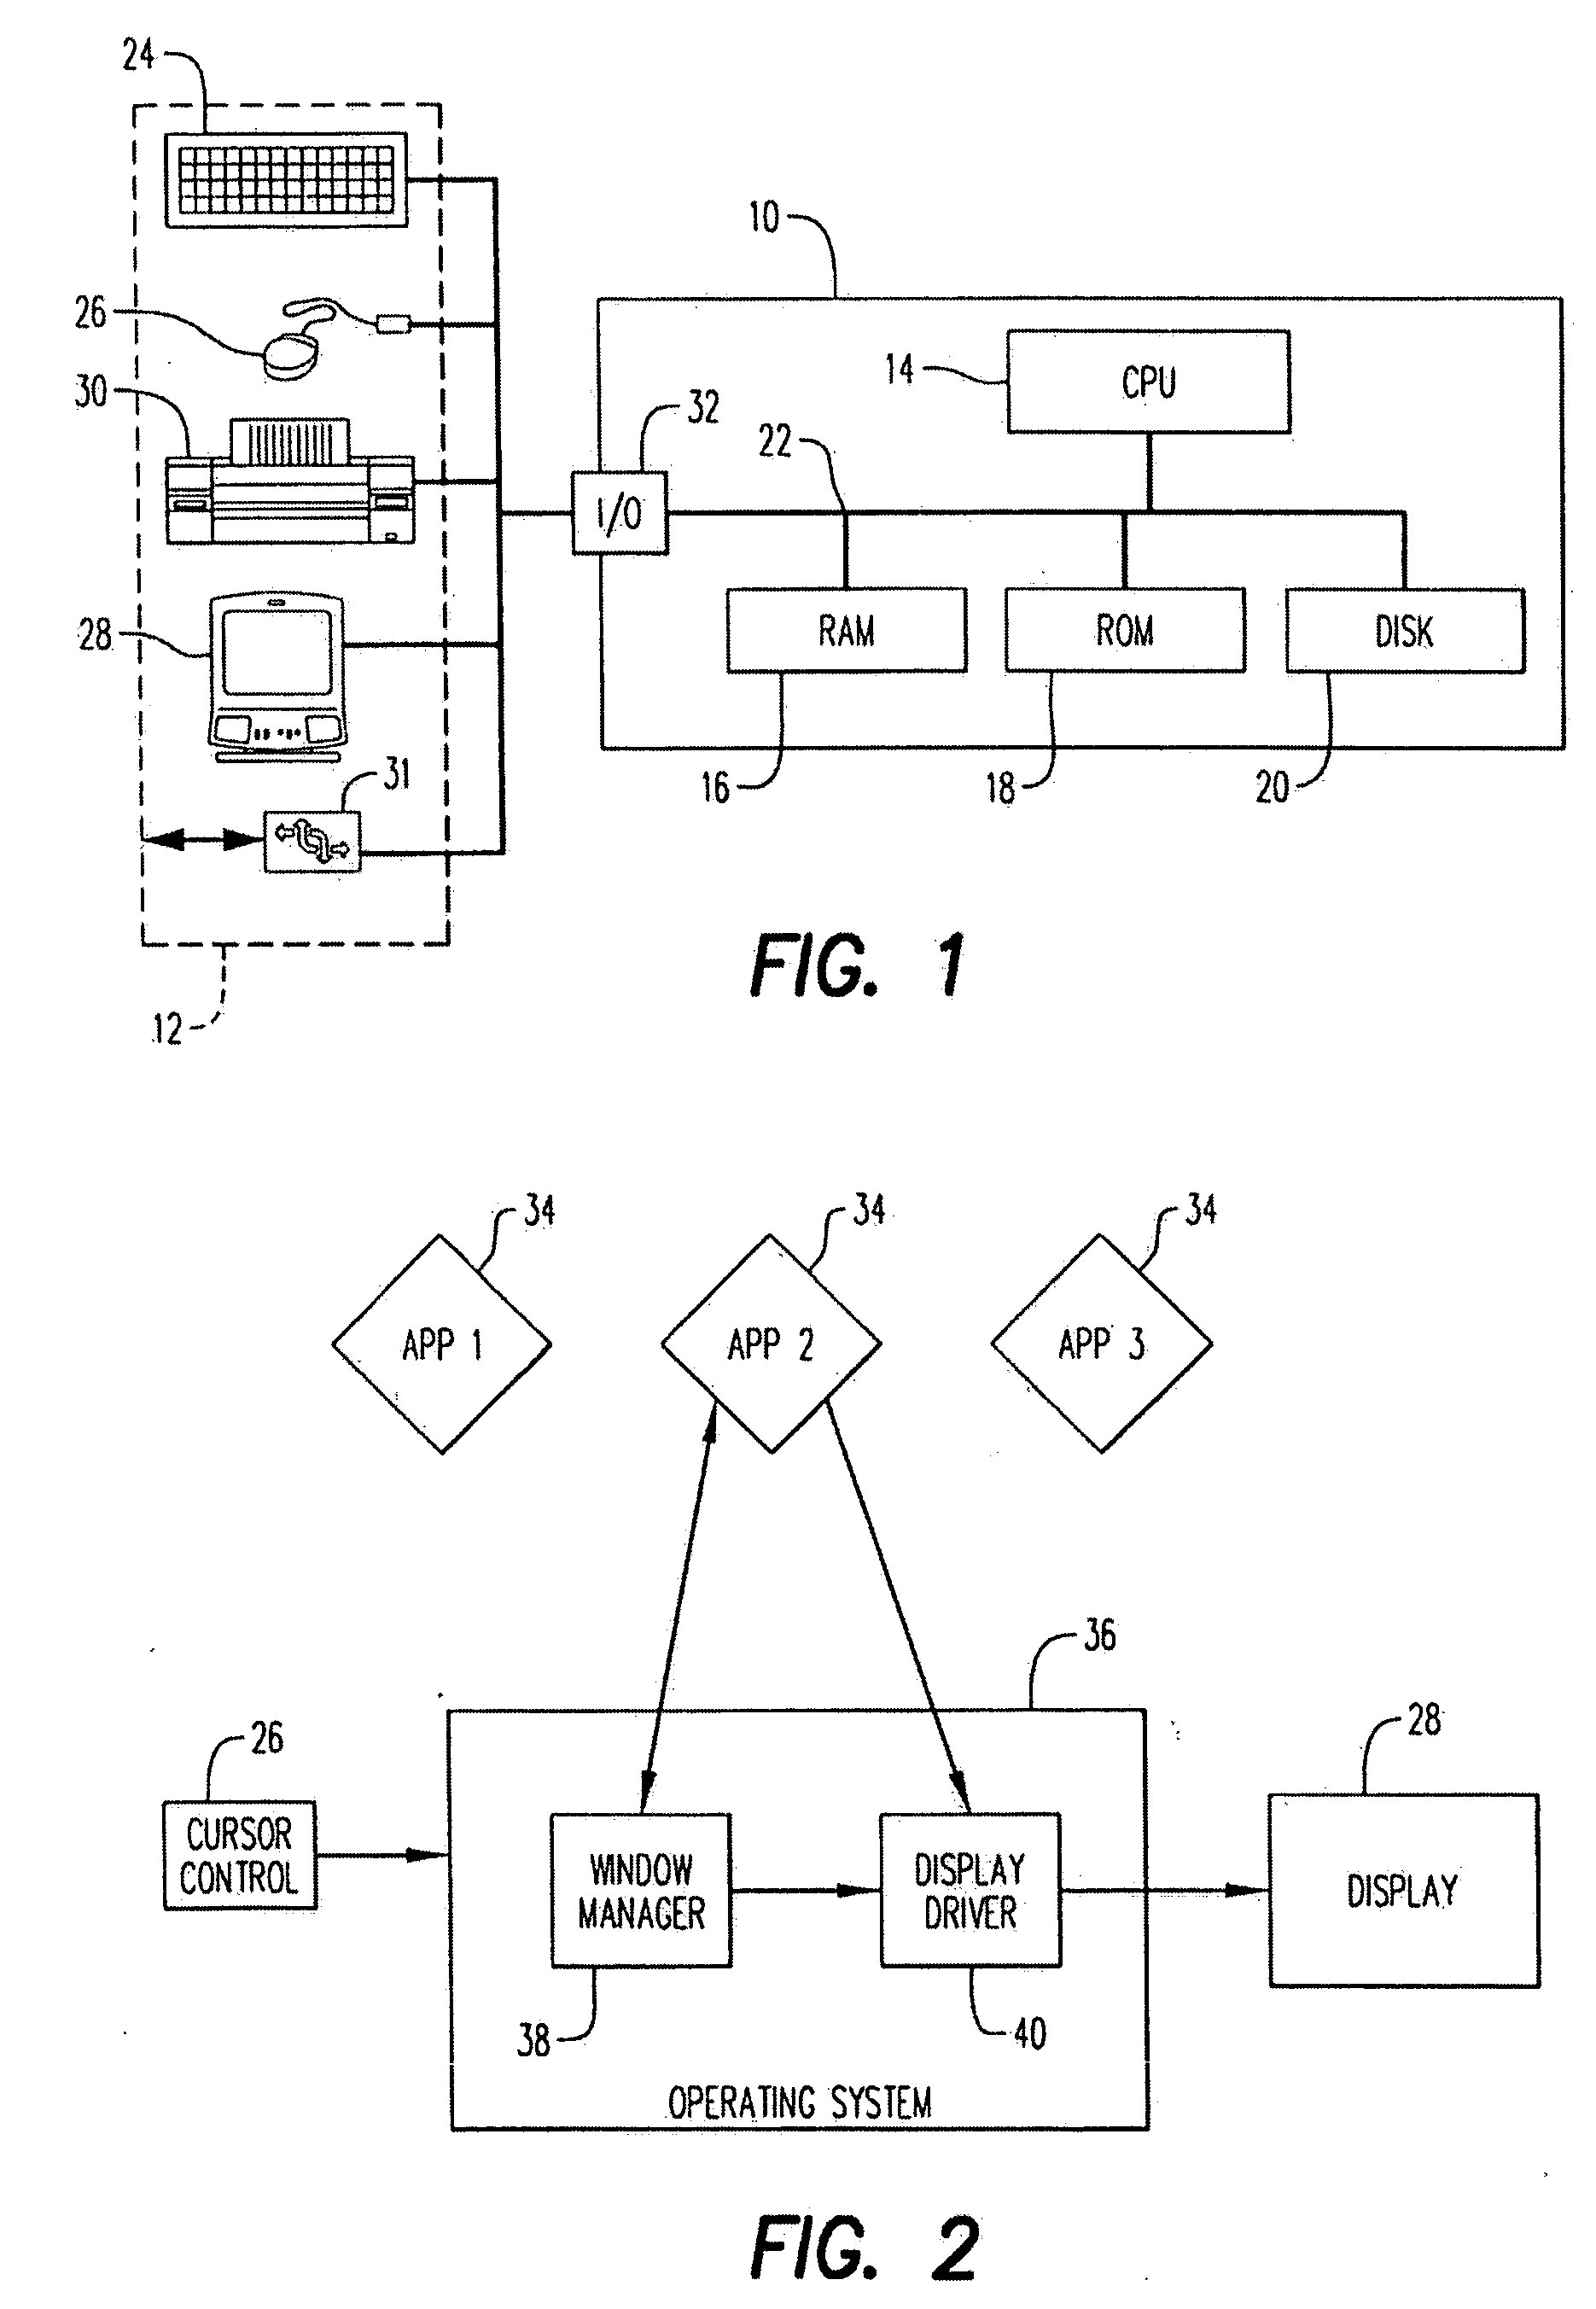 Computer Interface Having A Virtual Single-Layer Mode For Viewing Overlapping Objects